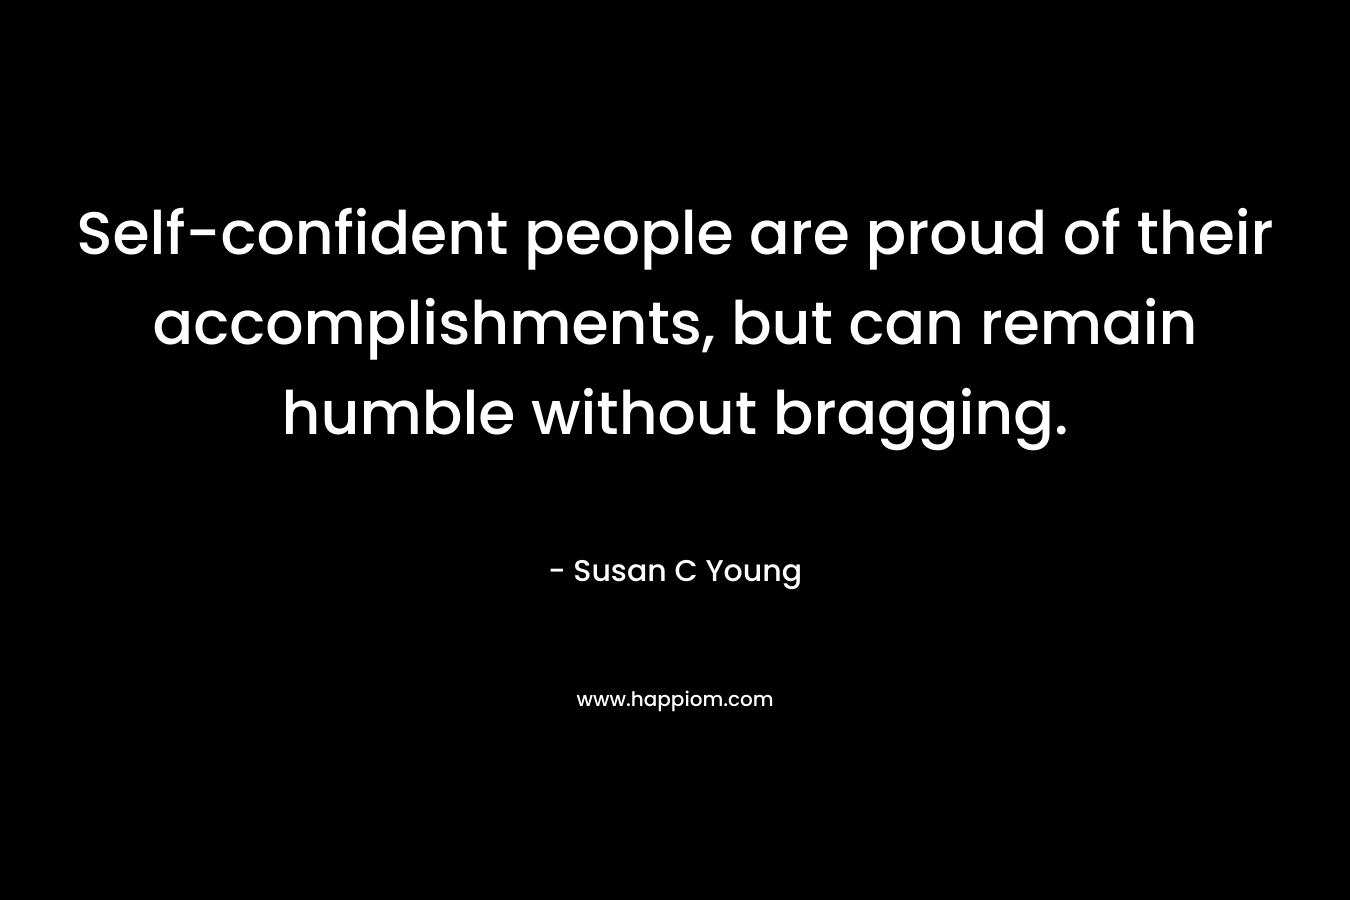 Self-confident people are proud of their accomplishments, but can remain humble without bragging. – Susan C Young